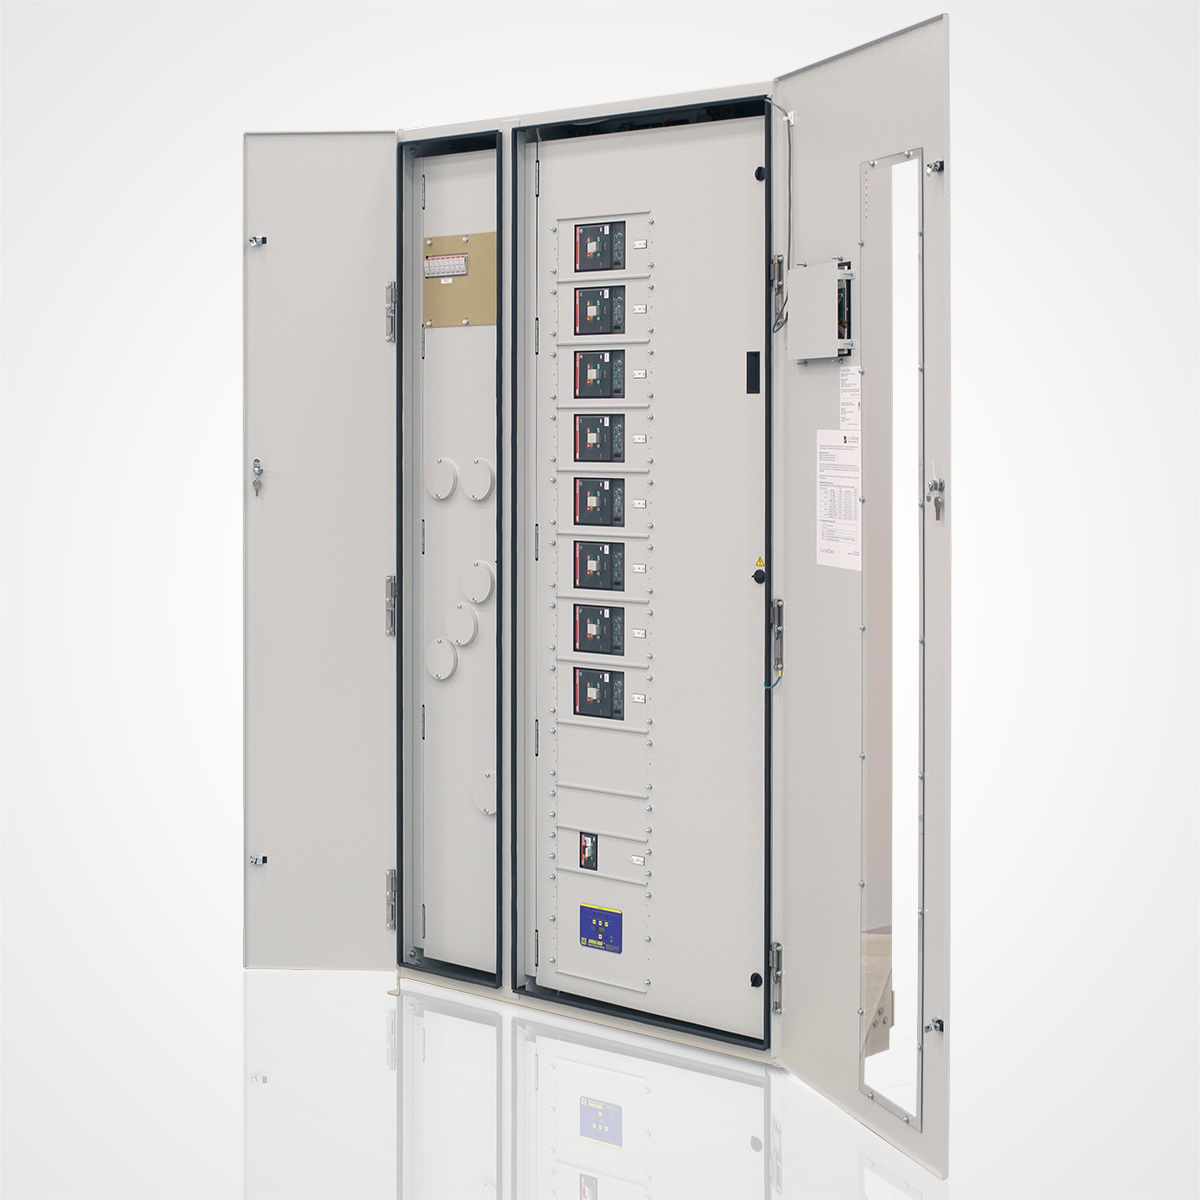 The LayerZero Series 70: eRDP Remote Distribution Panel with Outer Doors Open.